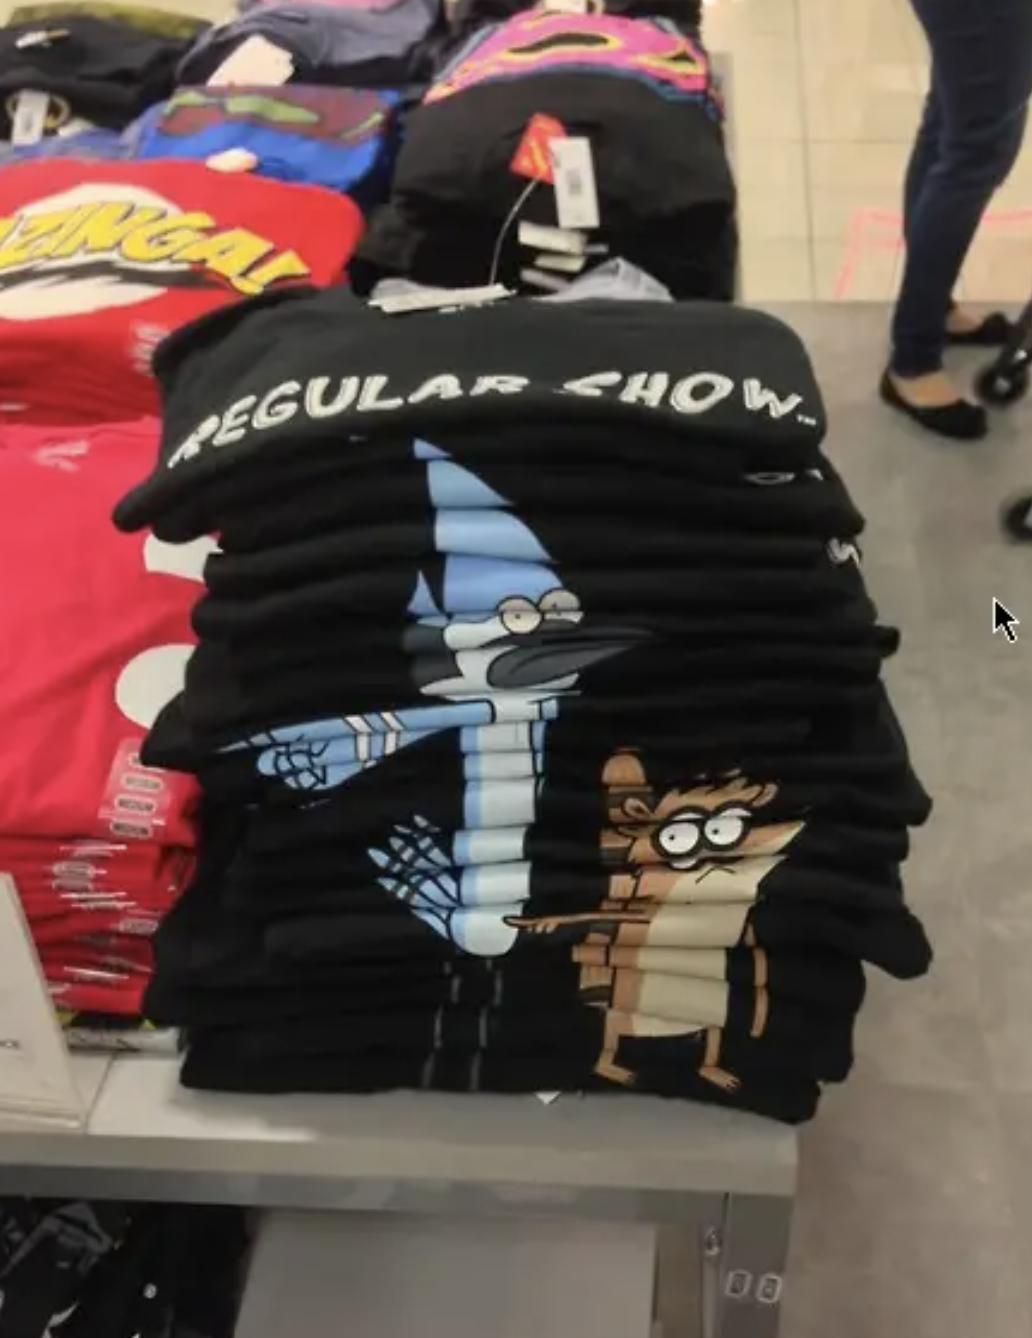 Stack of &#x27;Regular Show&#x27; t-shirts featuring characters Mordecai and Rigby